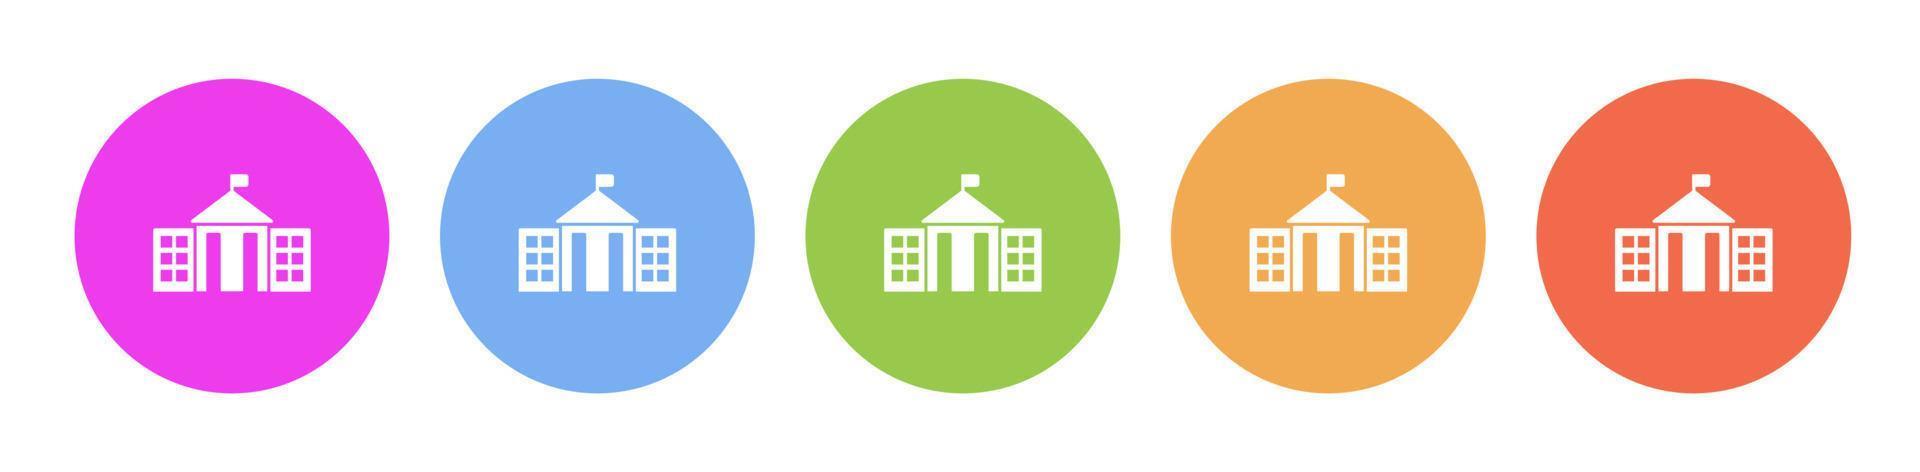 Multi colored flat icons on round backgrounds. City hall multicolor circle vector icon on white background